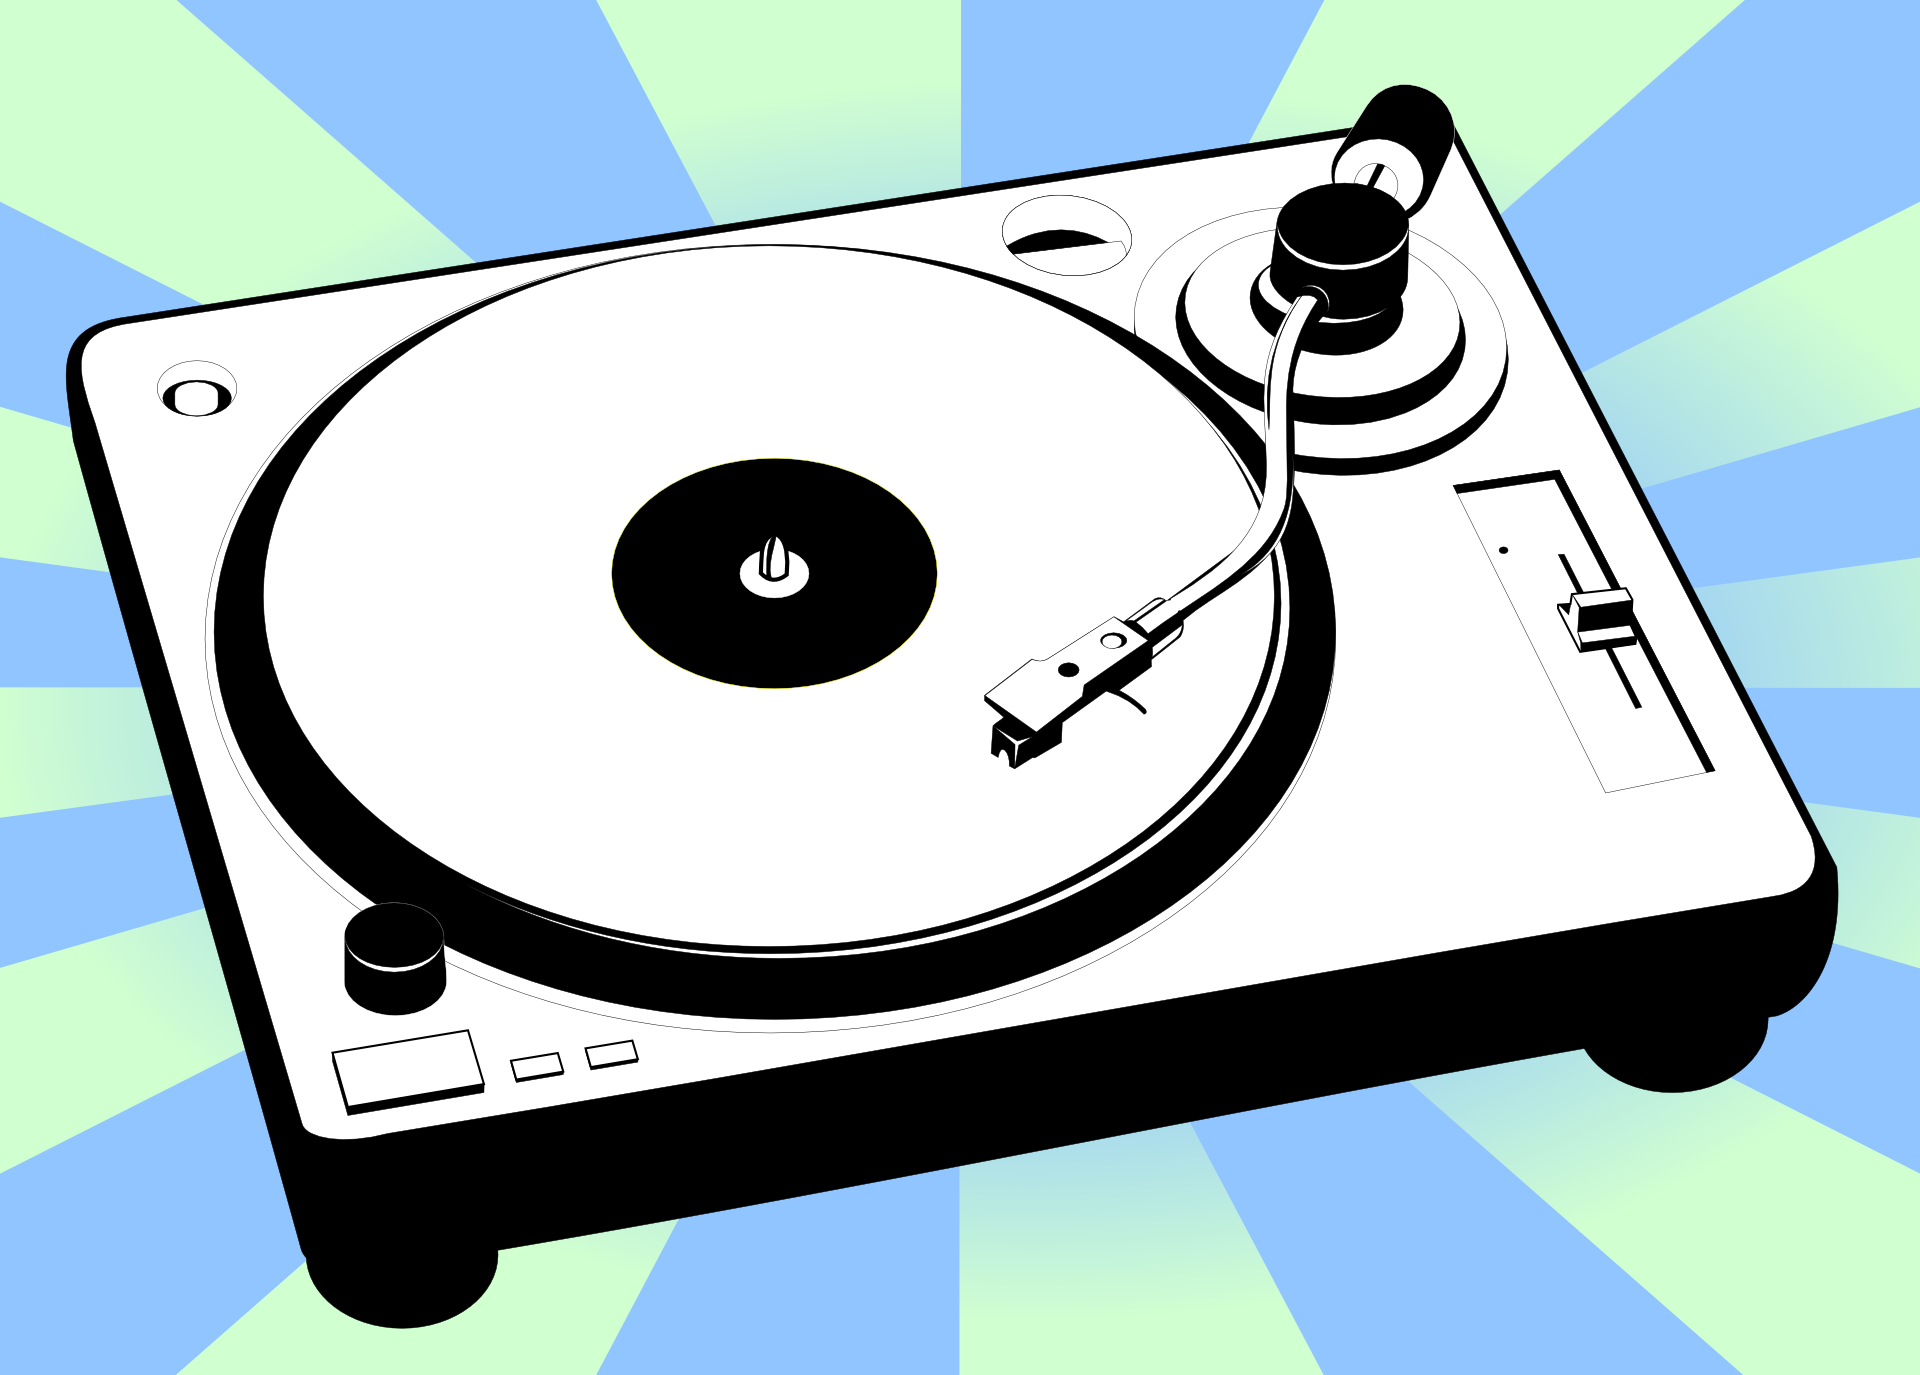 Phonograph record player drawing free image download